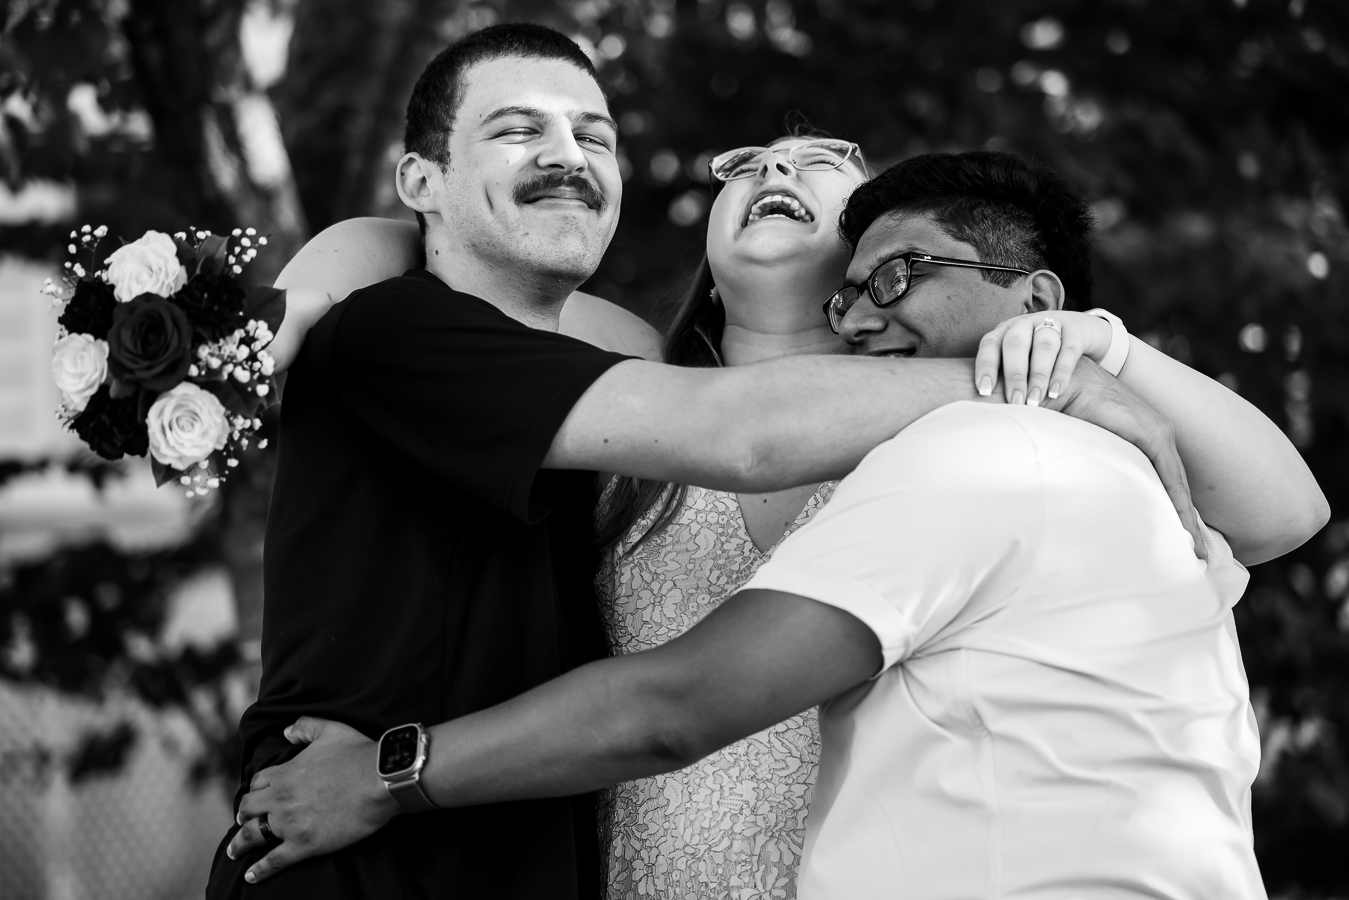 DMV wedding photographer, rhinehart photography, captures this black and white image of the couple with their best man as they all hug one another and laugh during this intimate wedding ceremony in spencerville Maryland 